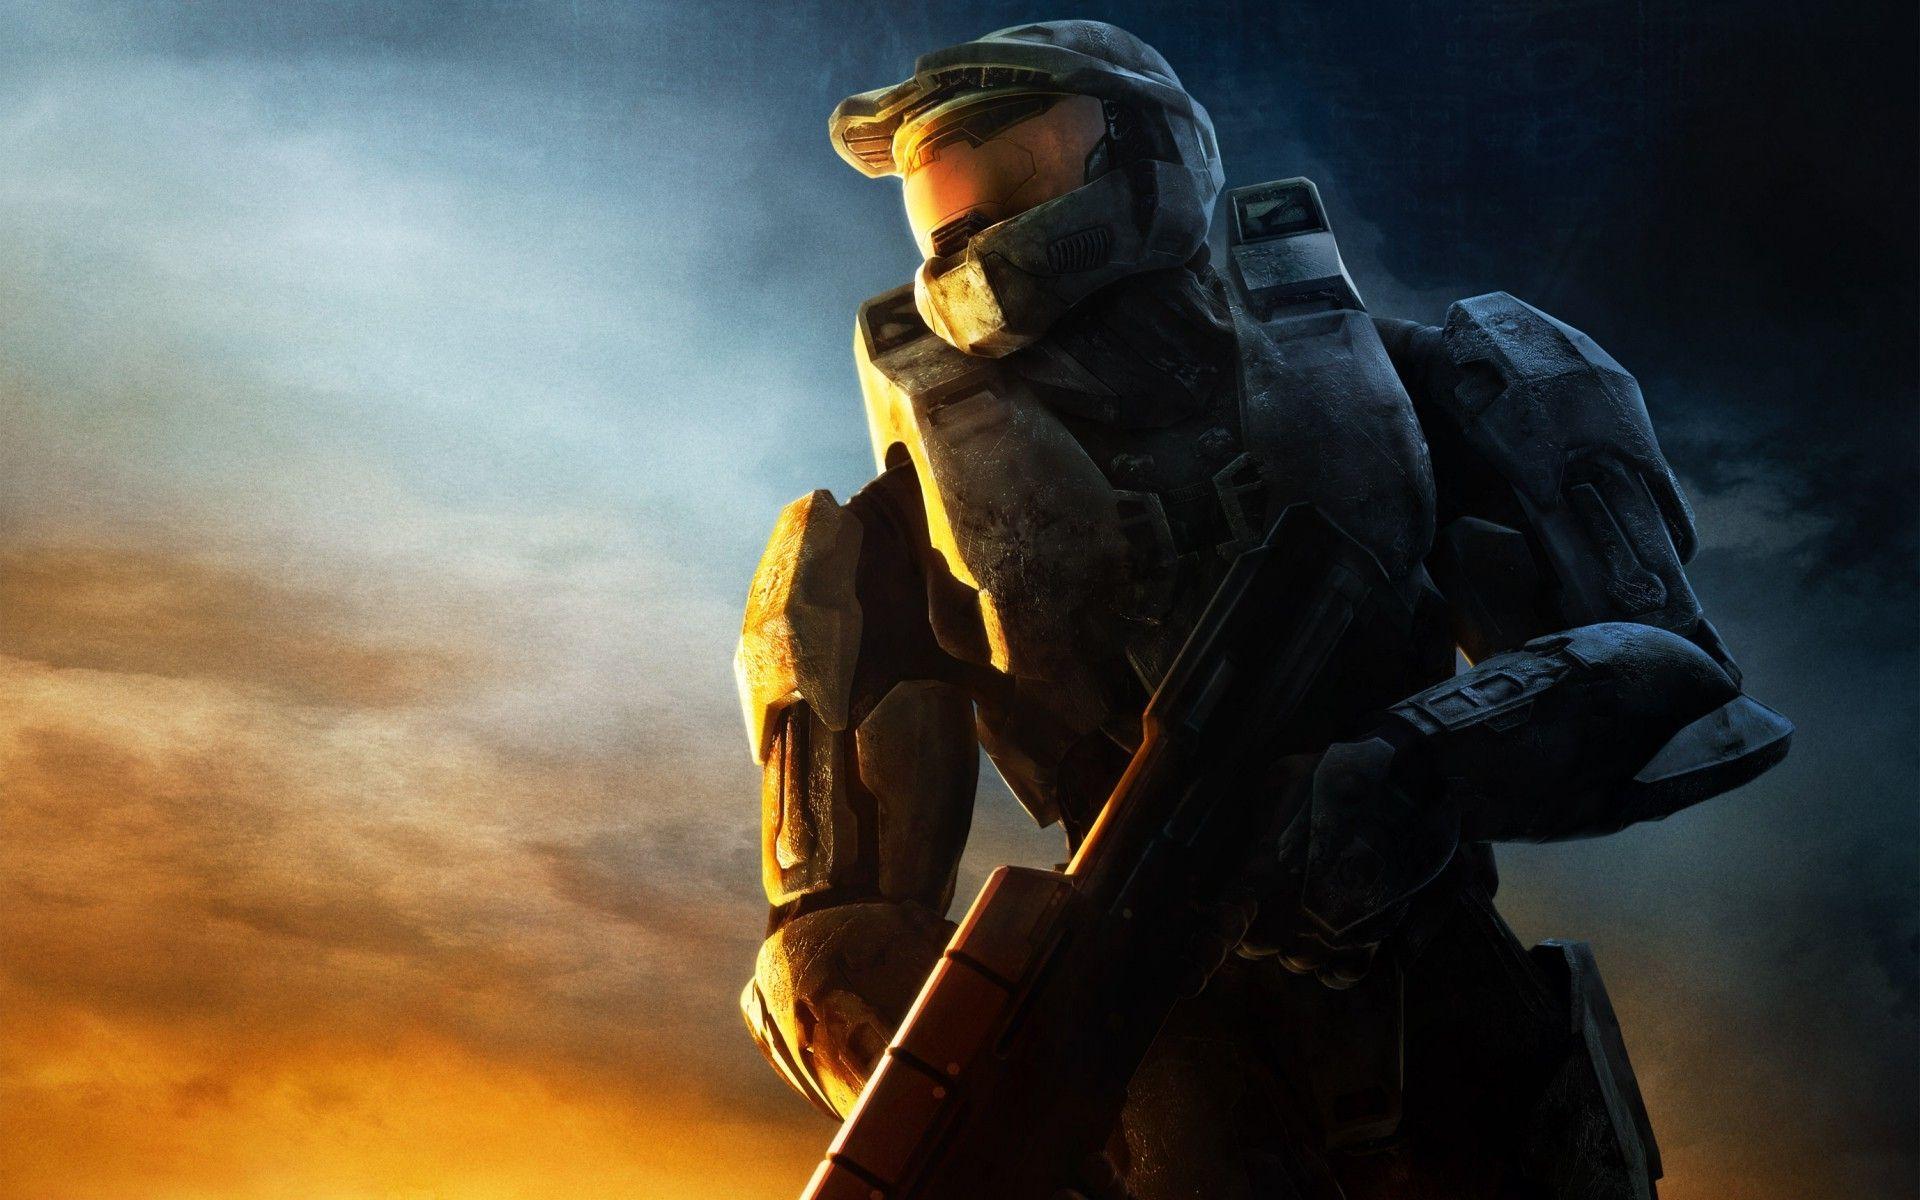 Halo 3 Download For Mac